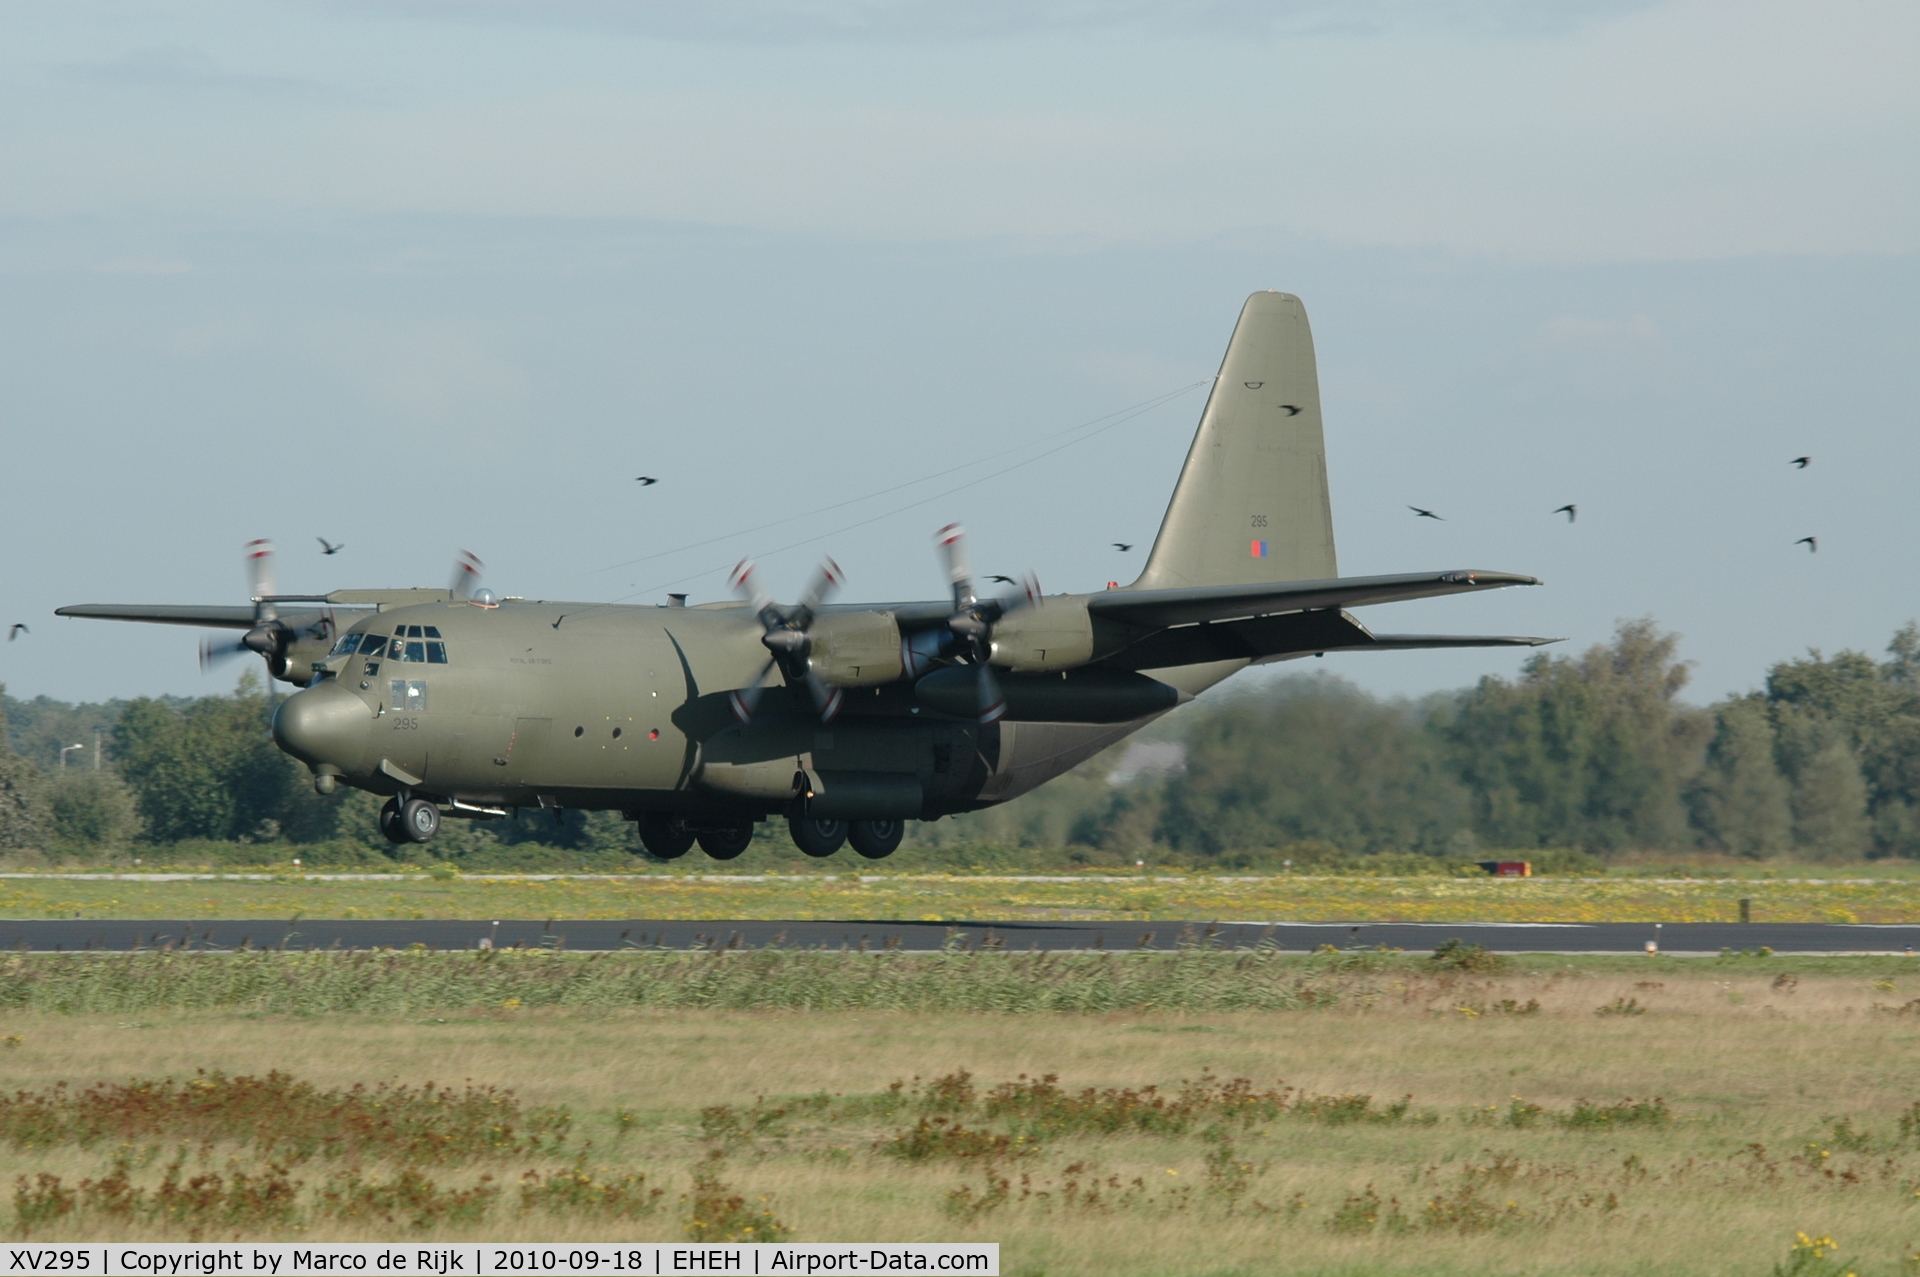 XV295, 1967 Lockheed C-130K Hercules C.1 C/N 382-4261, Photo taken at Eindhoven airport at 18-09-2010, during Market Garden memorial in Ede (nl), the aircraft was involved with dropping parachutists at 